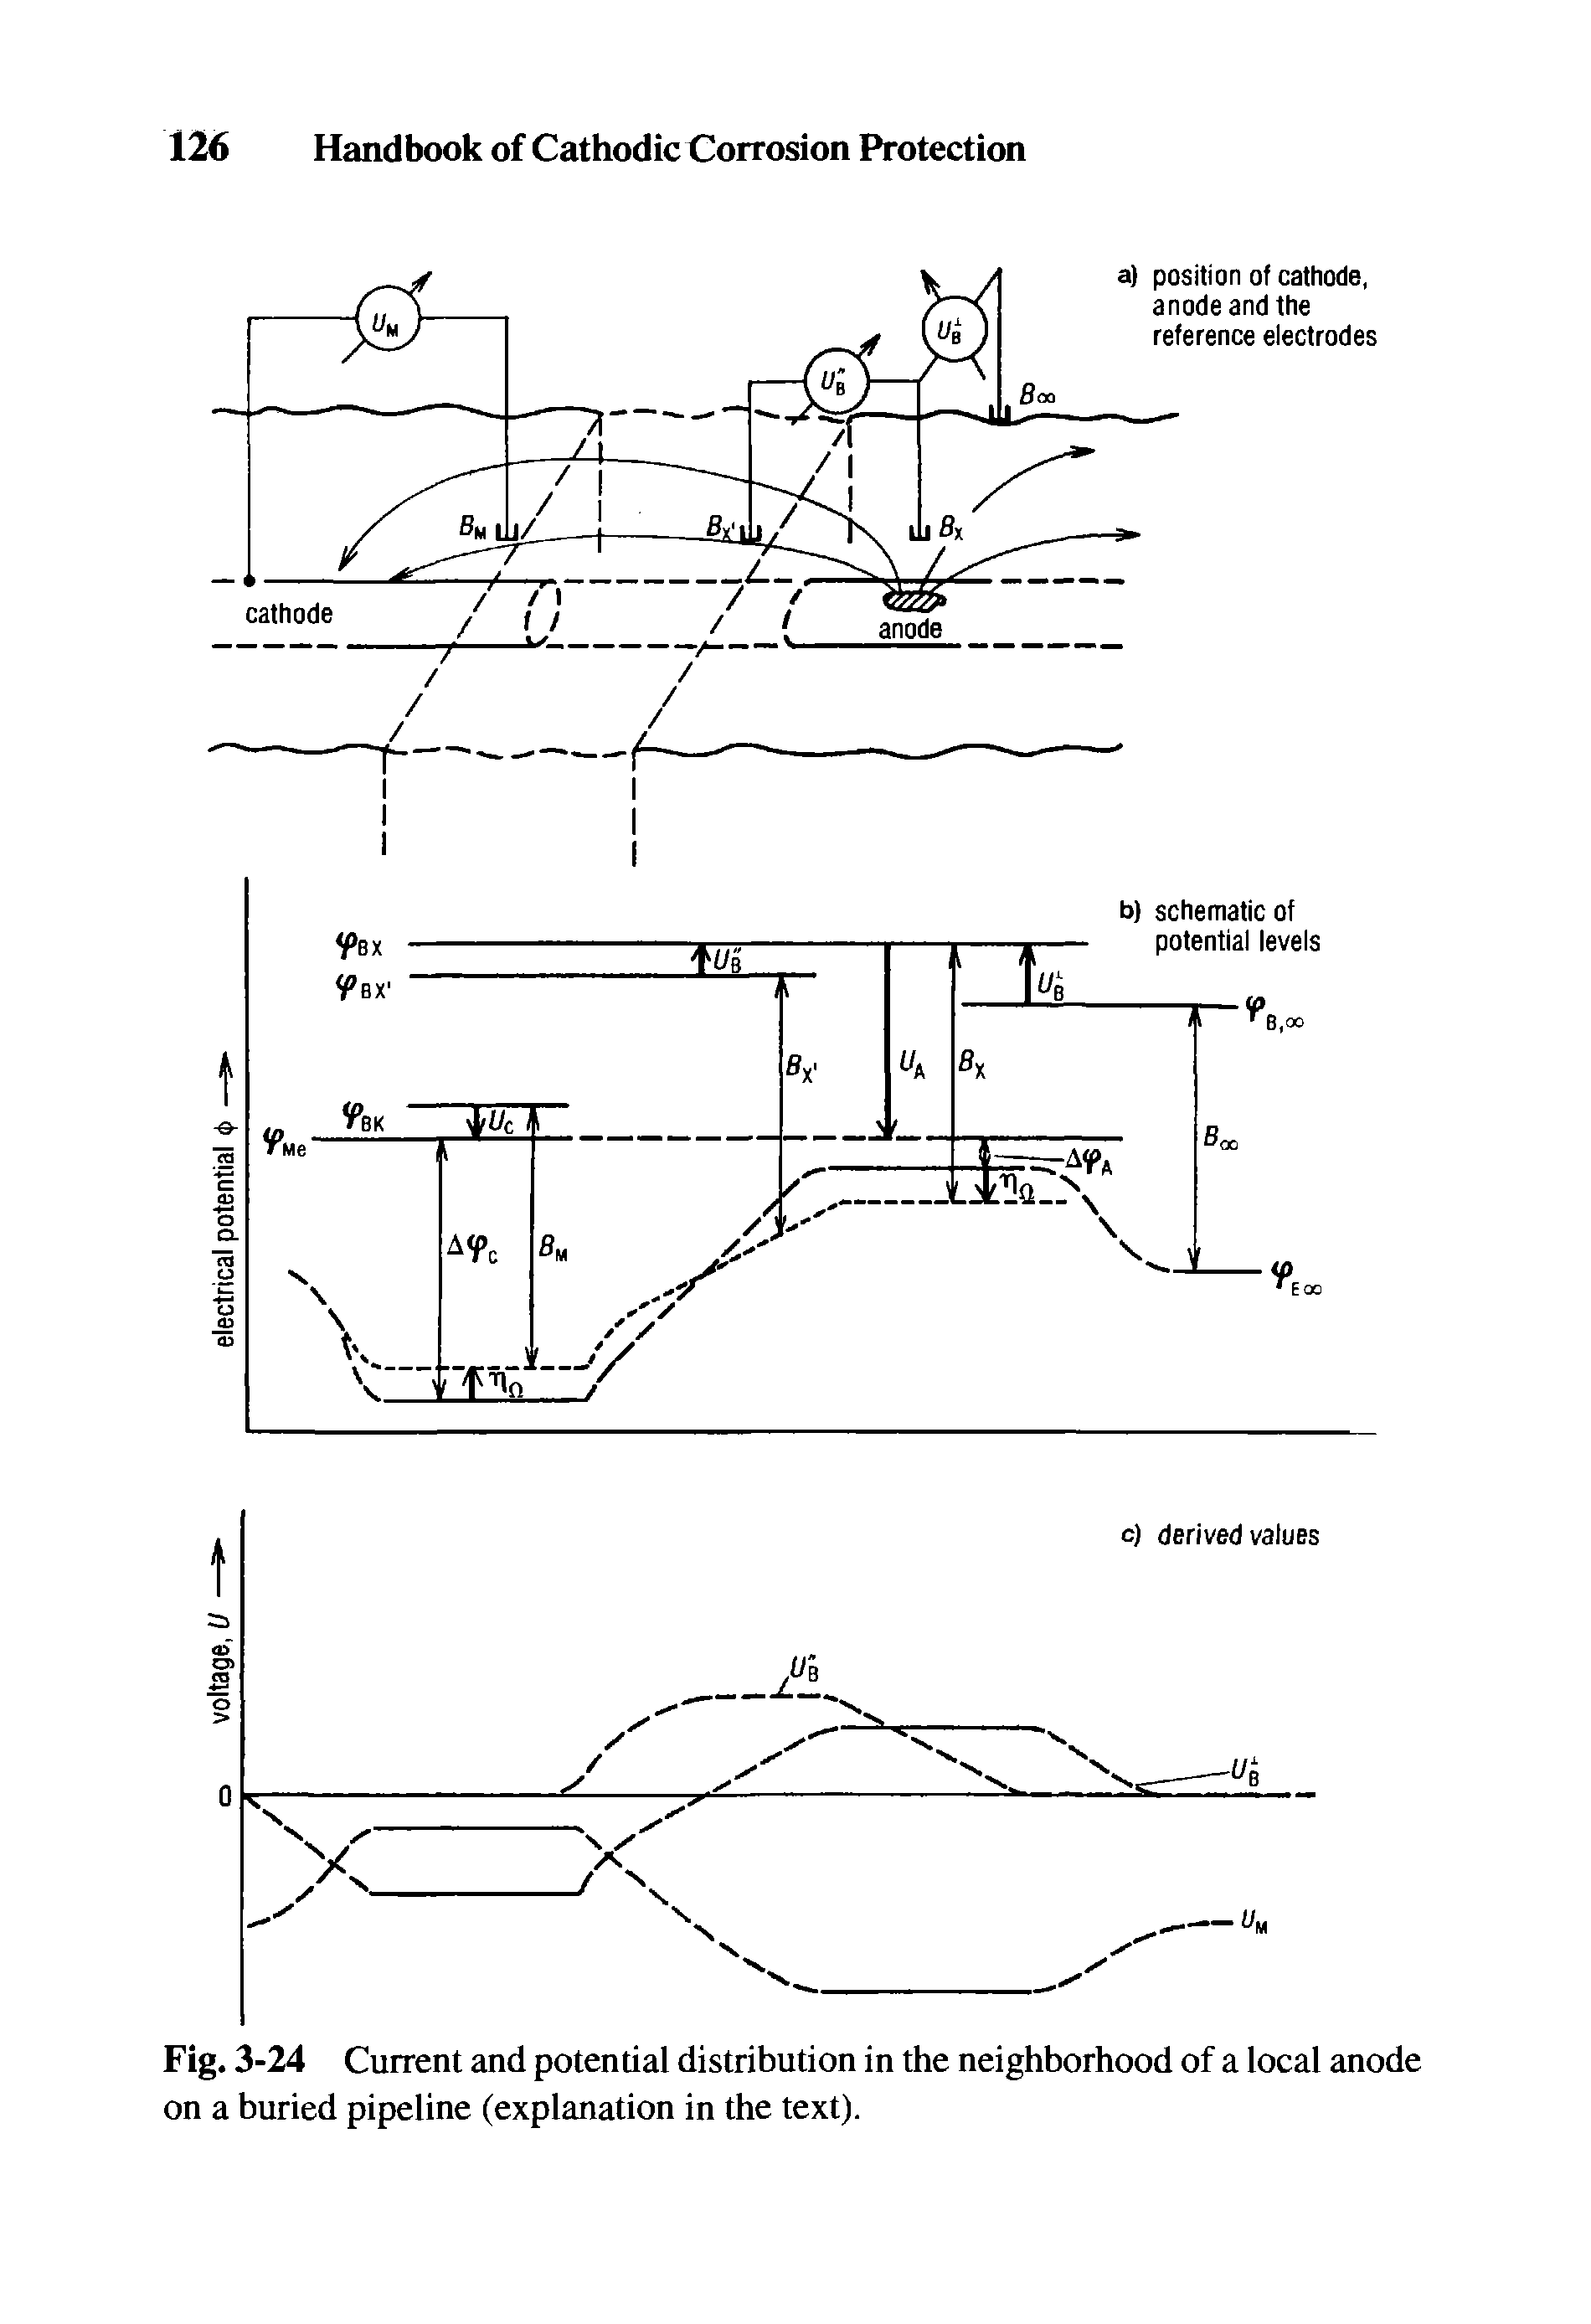 Fig. 3-24 Current and potential distribution in the neighborhood of a local anode on a buried pipeline (explanation in the text).